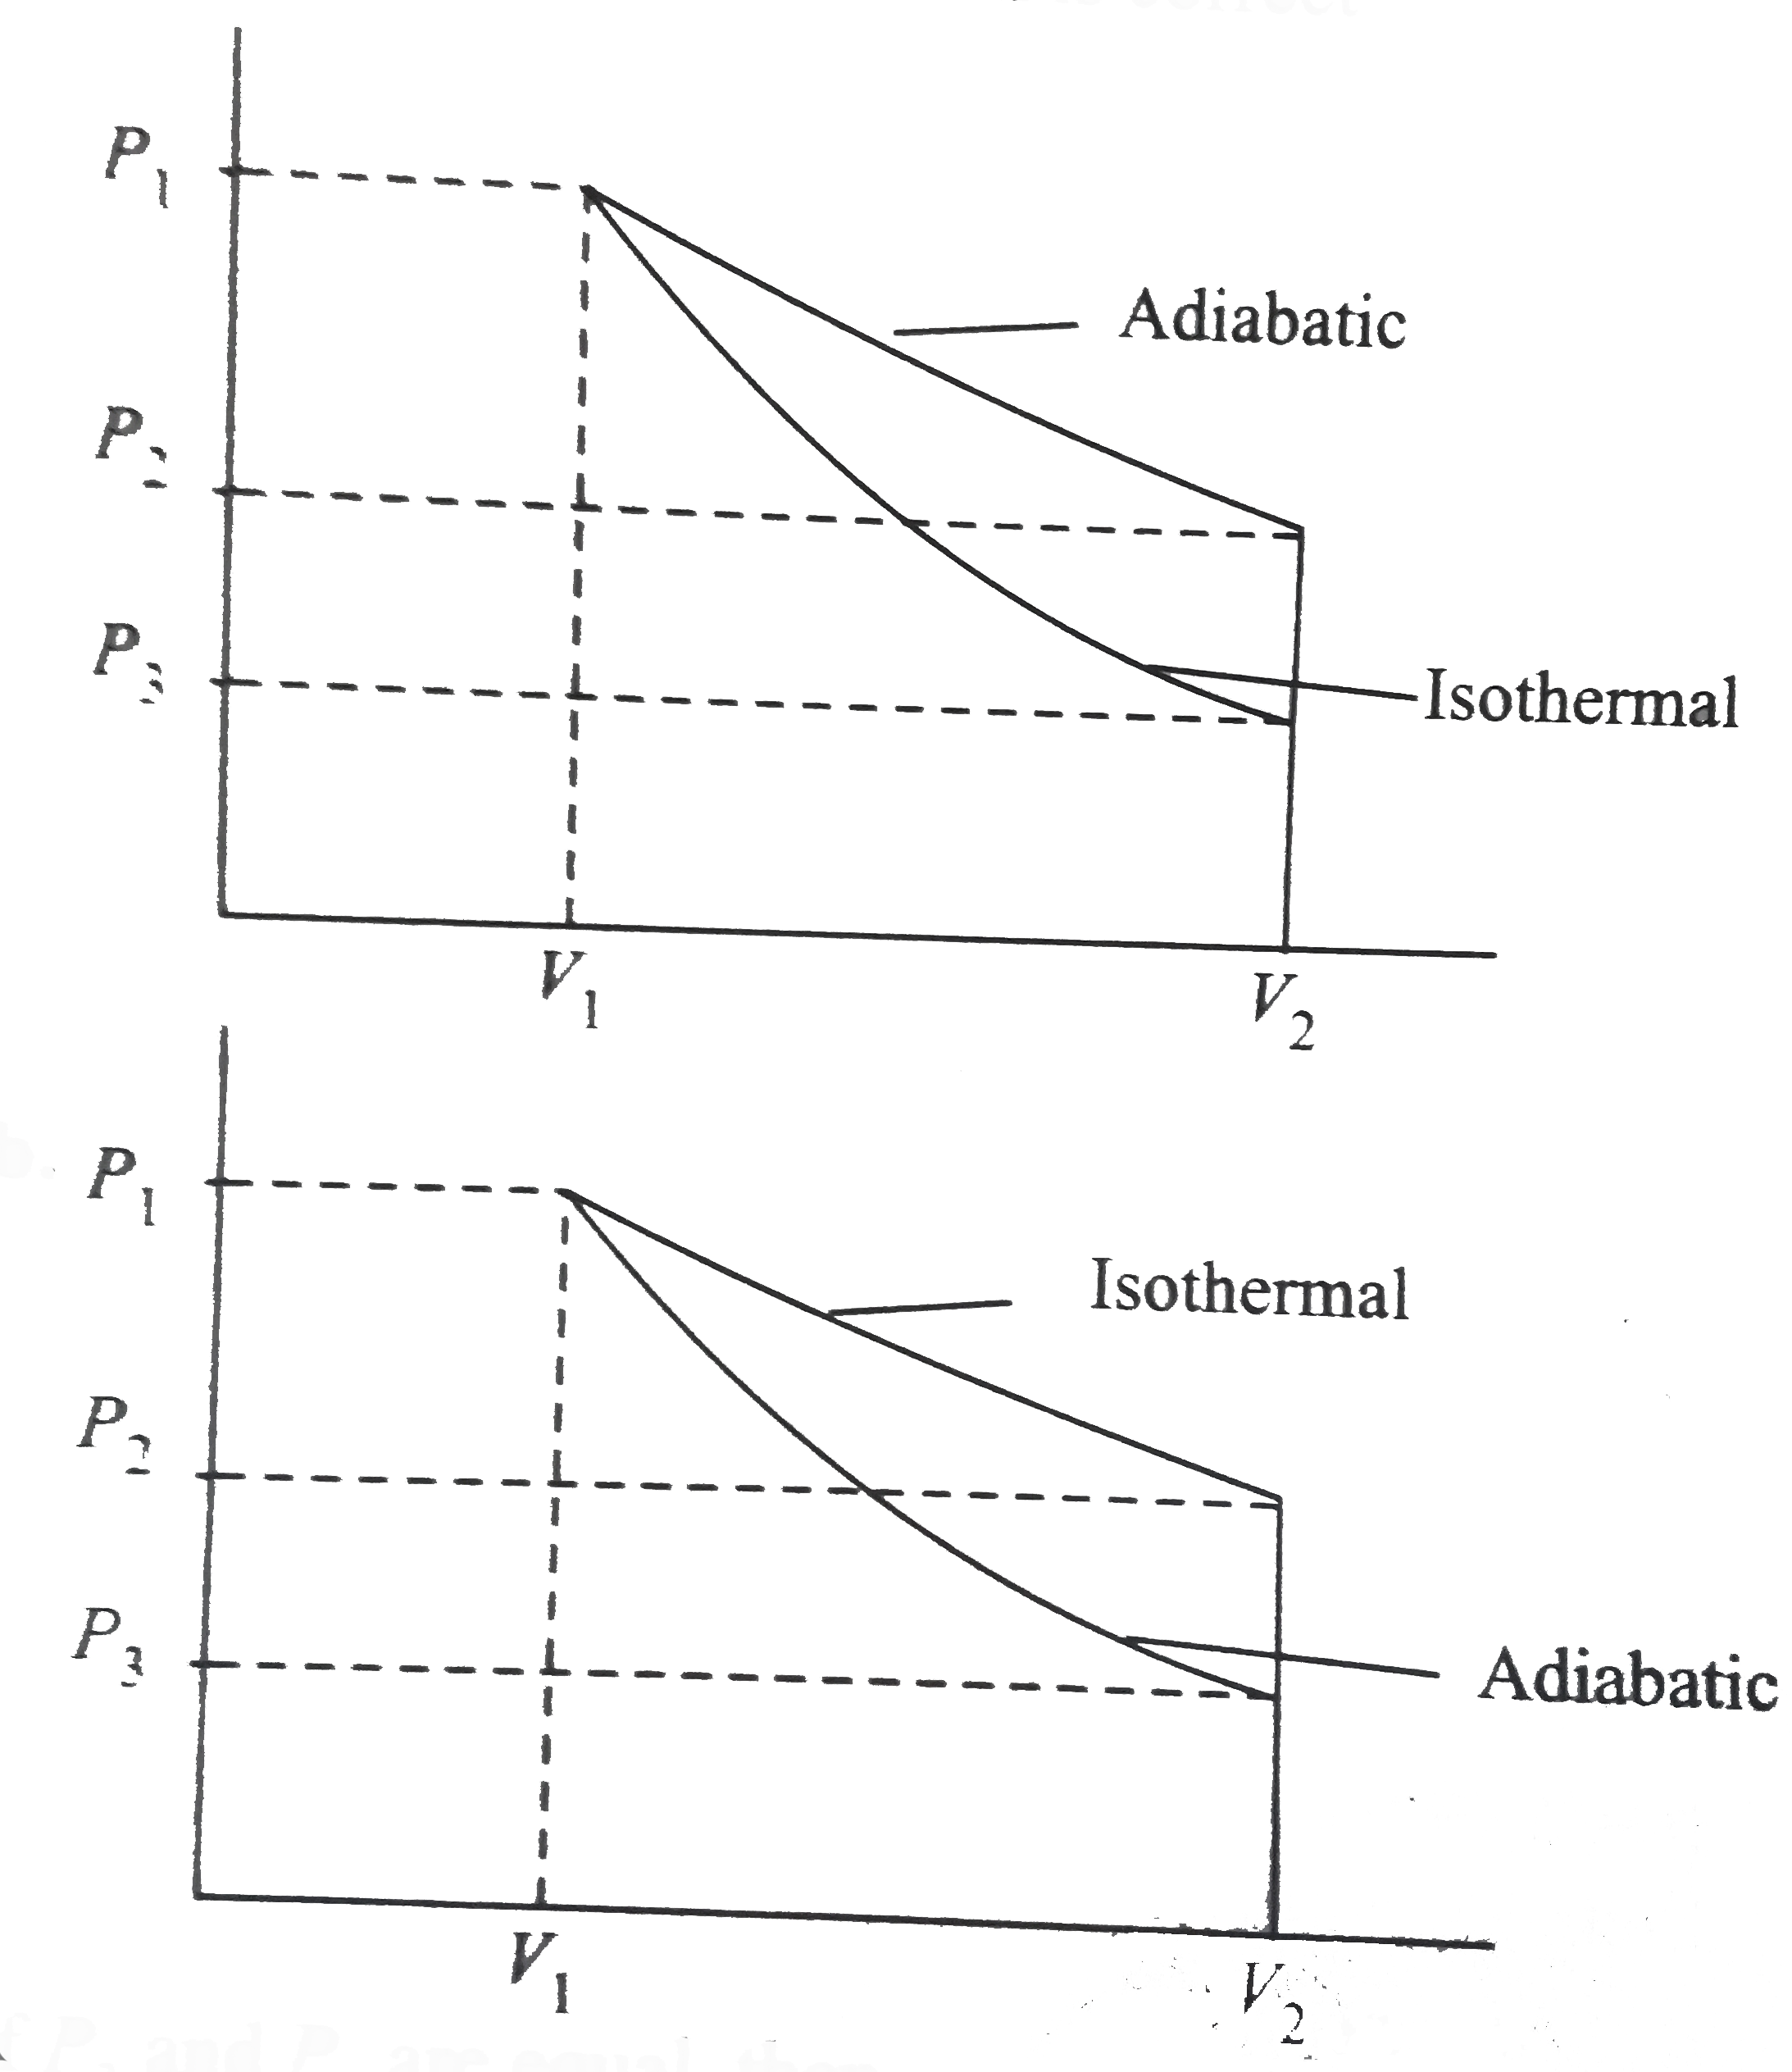 A sample of ideal gas undergoes isothermal expansion in a reversible manner from volume V(1) to volume V(2). The initial pressure is P(1) and the final pressure is P(2). The same sample is then allowed to undergoes reversible expansion under adiabatic conditions from volume V(1) to V(2). The initial pressure being same but final pressure is P(2).   Which graphic representation is correct   a.